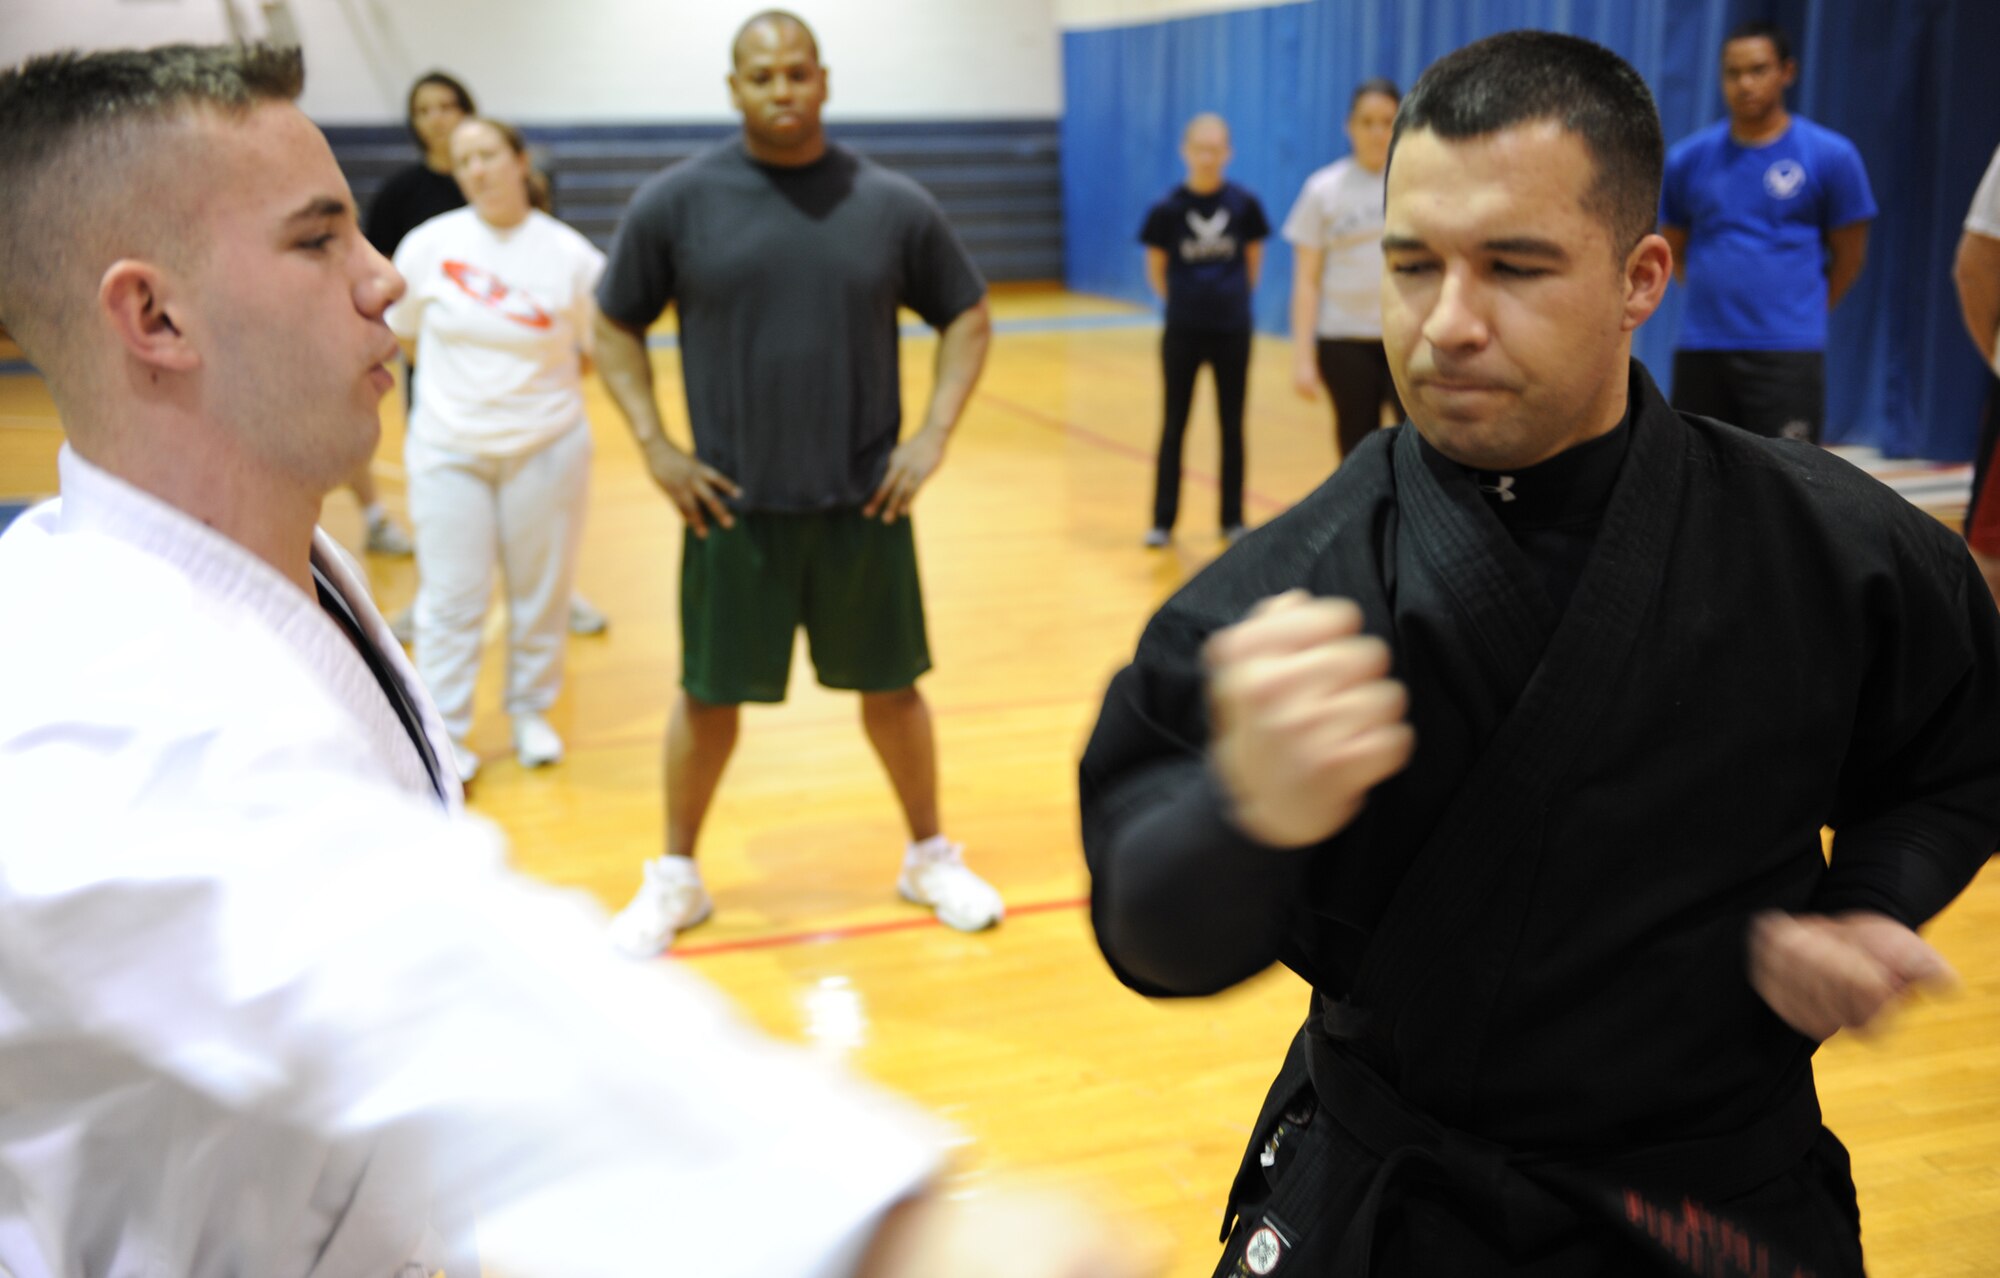 WHITEMAN AIR FORCE BASE, Mo. – Sensei Larry Tolliver, Kenpo Instructor, blocks a punch from Senior Airman Cory Todd, a Kenpo student and member of the 509th Bomb Wing Public Affairs, during a demonstration for his class Feb. 2. Kenpo is a Japanese term that translates to mean “Law of the Fist.” Classes are Mondays and Wednesdays from 5 – 6 p.m. at the fitness center for $8 a class. (U.S. Air Force photo/Senior Airman Stephen Linch)